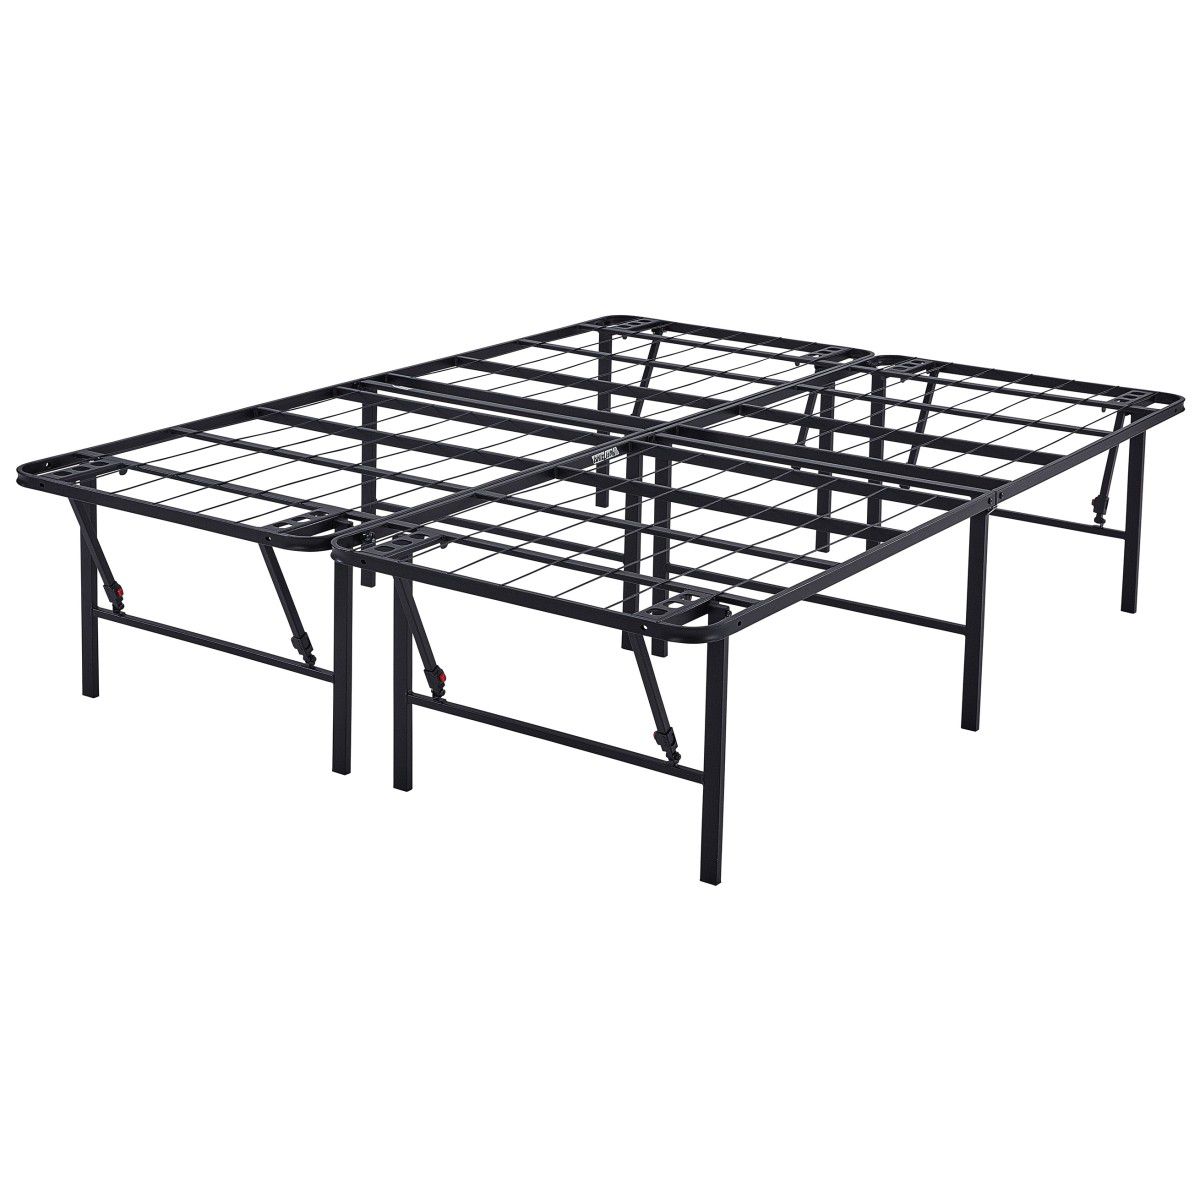 Mainstays 18" High Profile Foldable Steel Bed Frame Full size